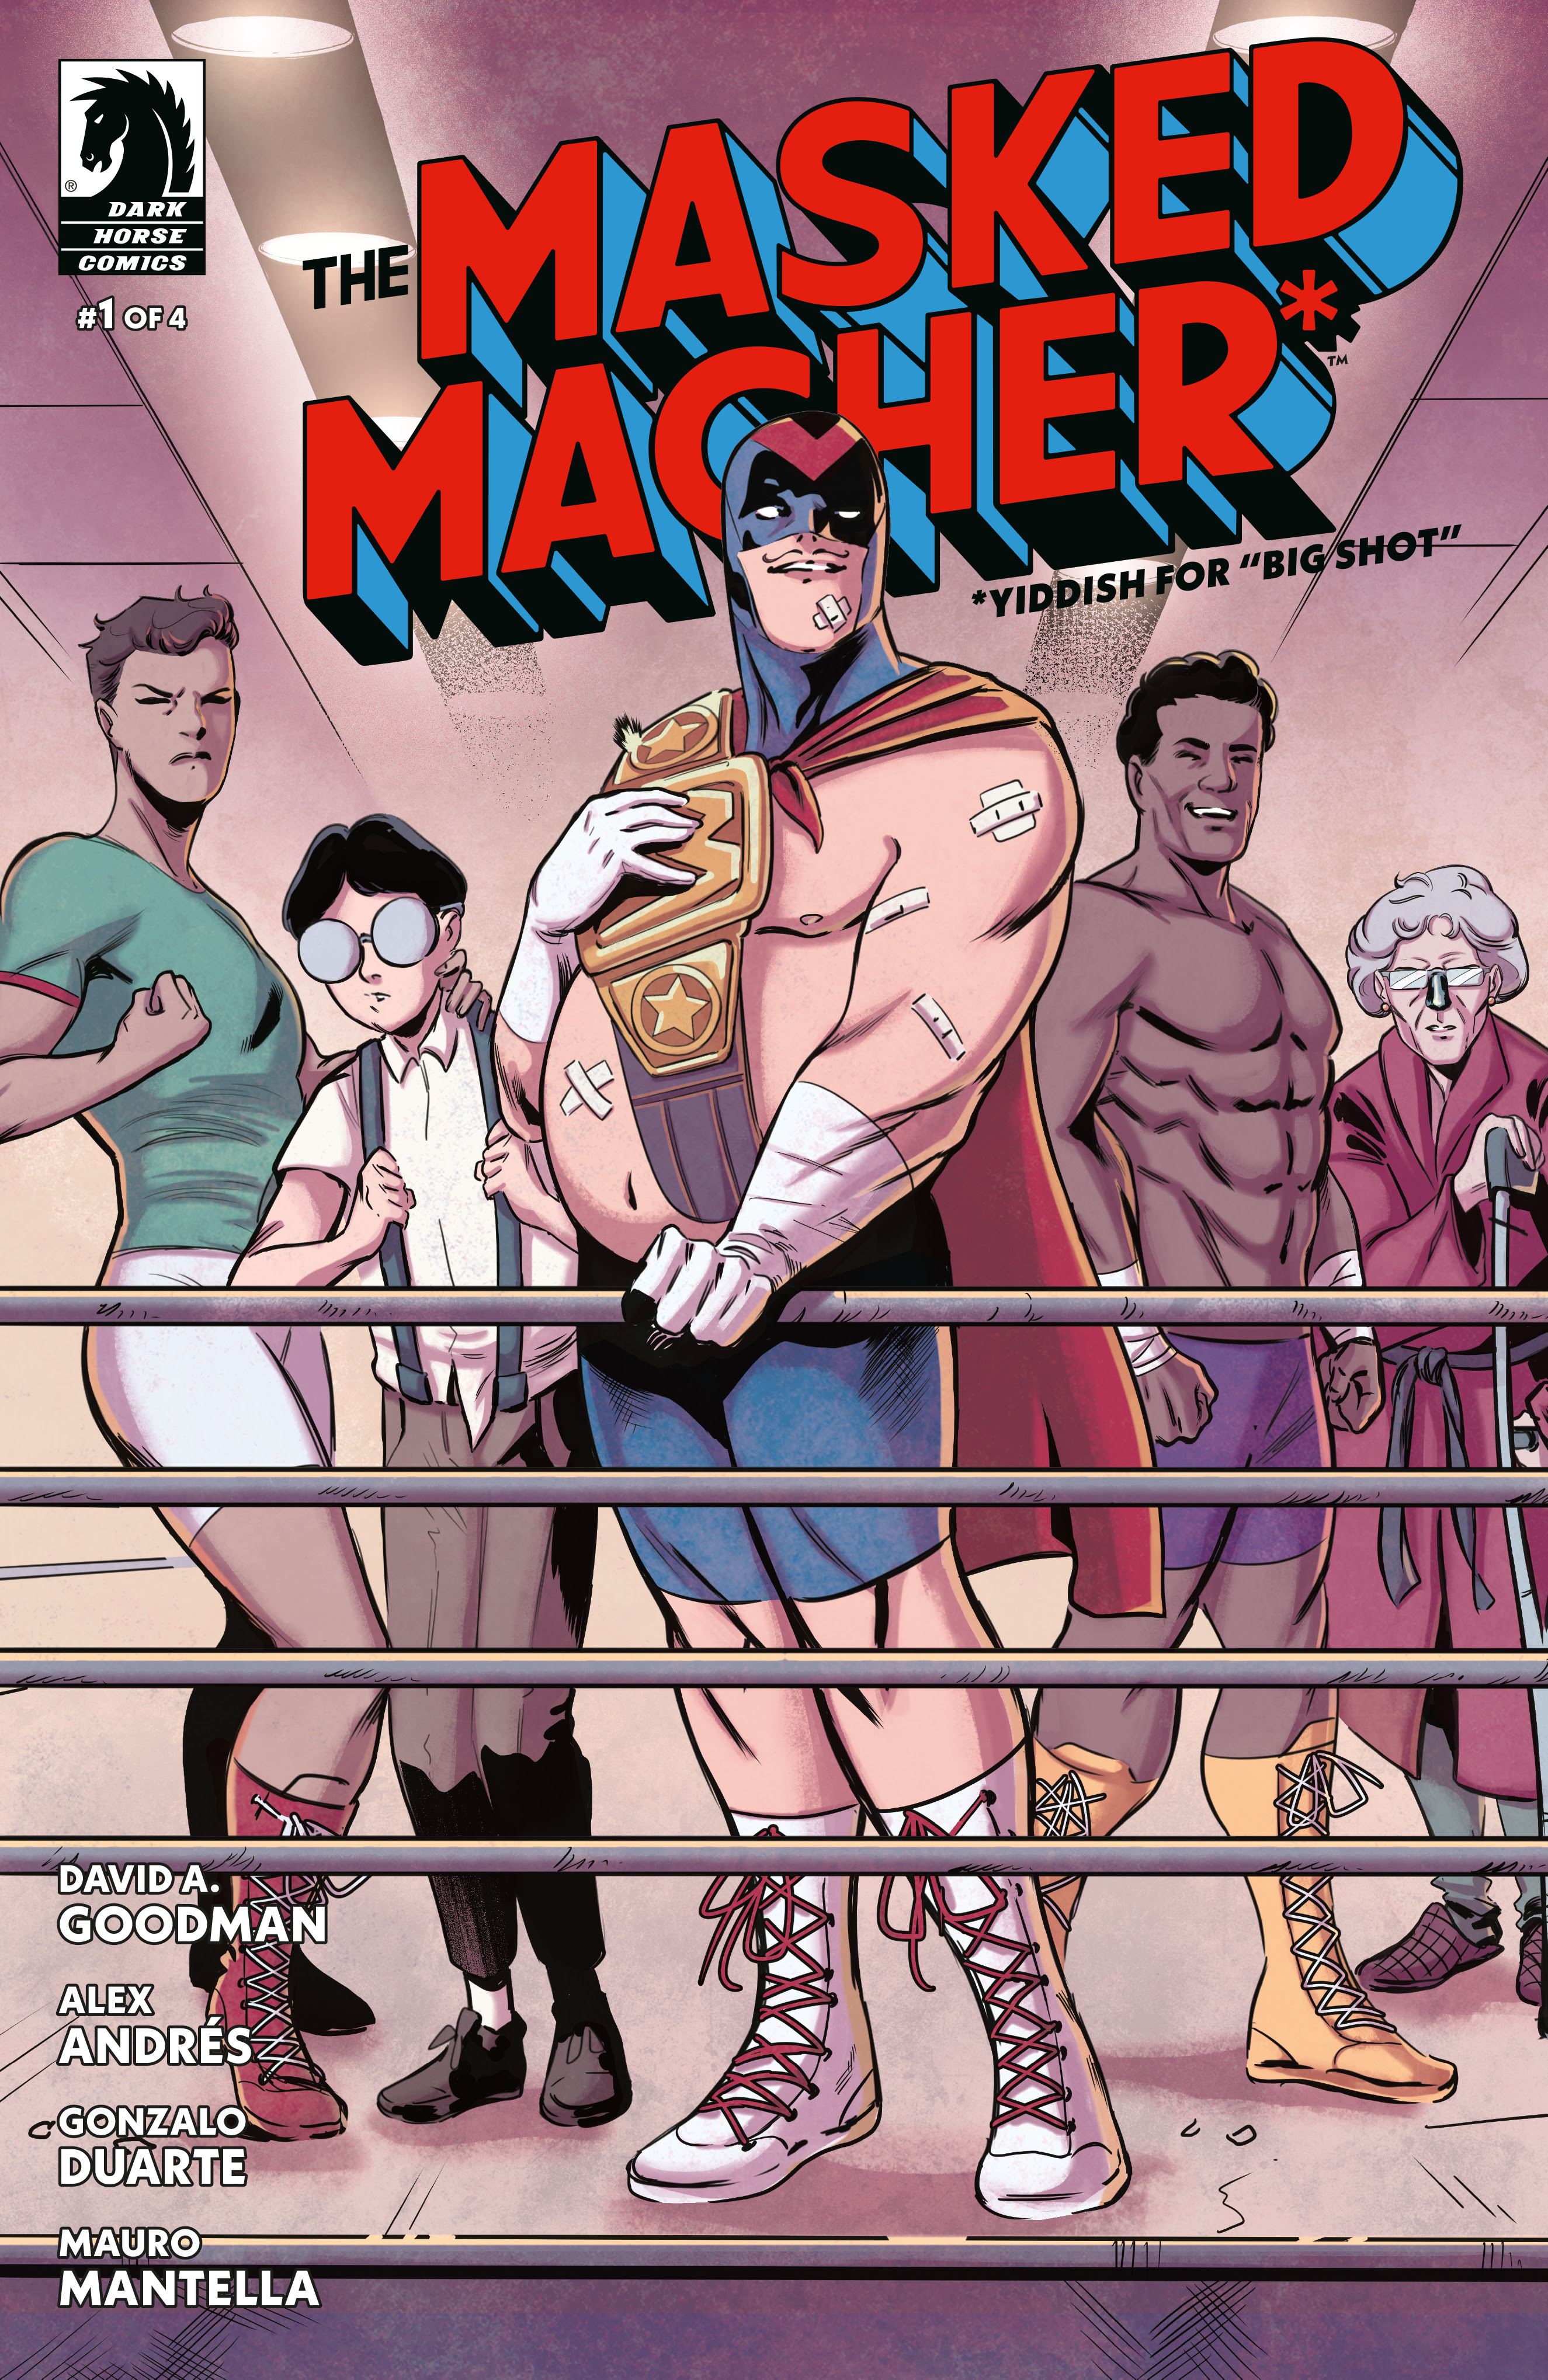 Five figures stand in a boxing ring. Central is a large masked white man holding a wrestling belt and the rest from left to right are a skinny, tall, white boy, a scrawny white nerd-coded person, a muscular black man, and a short, white-haired white woman.